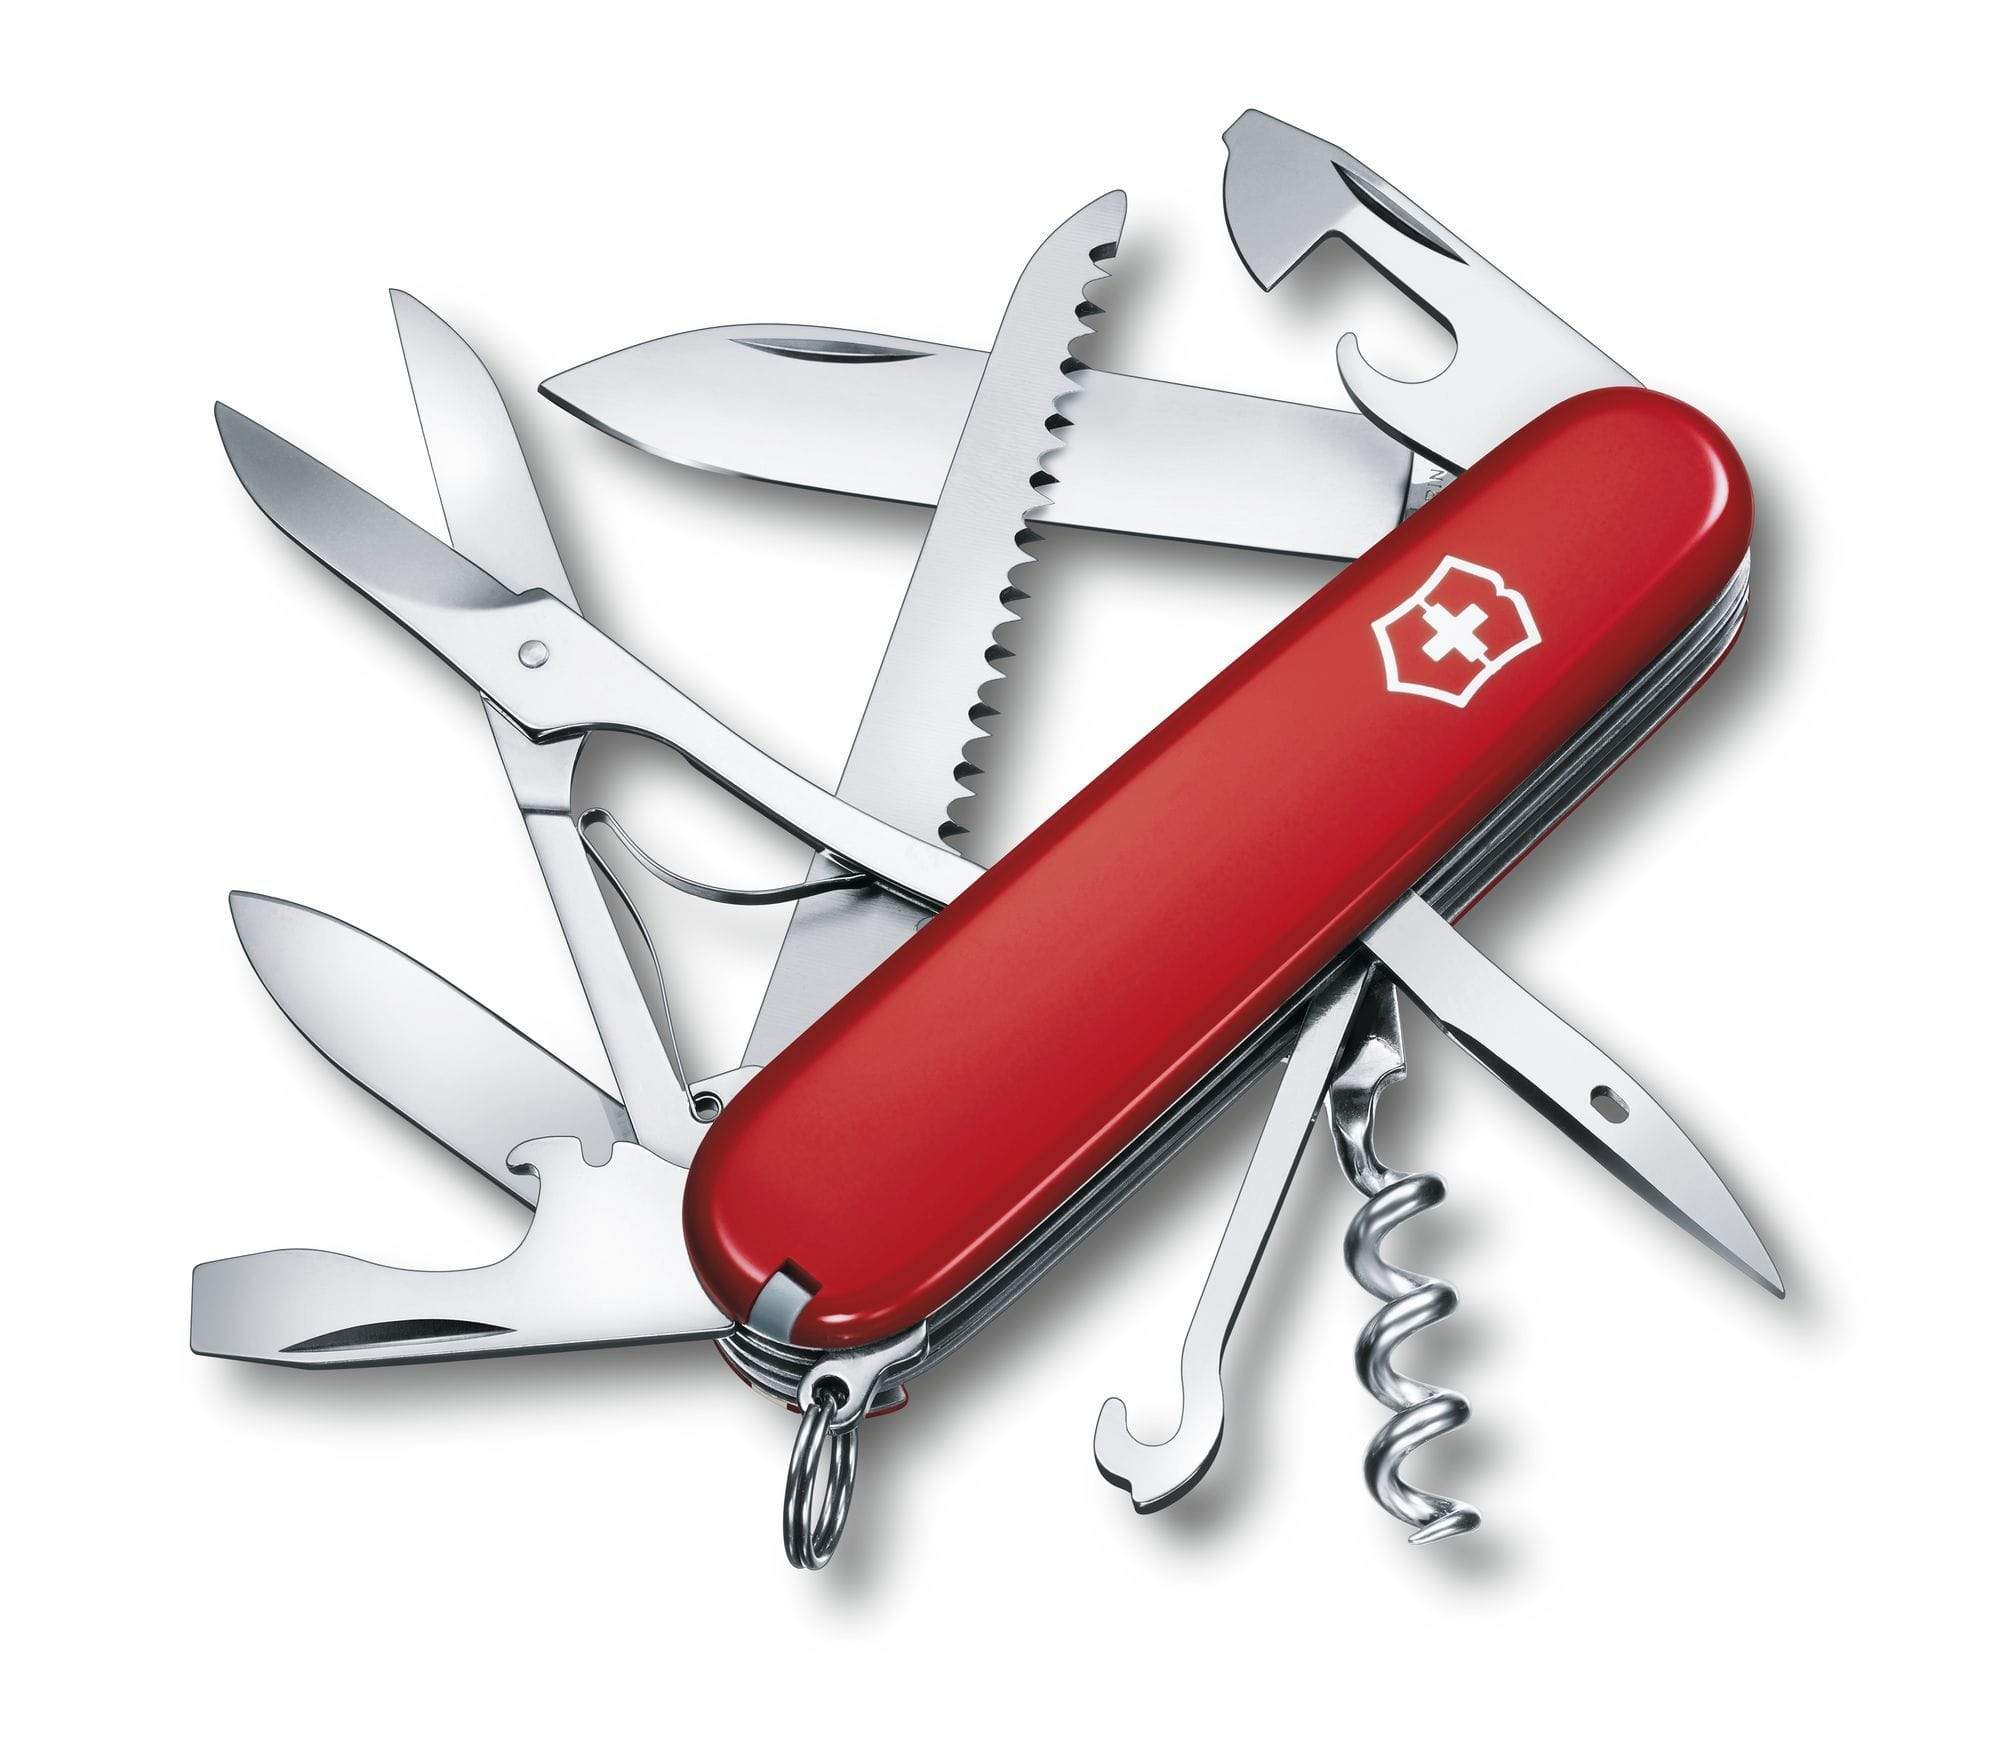 VICTORINOX SWISS ARMY KNIFE HUNTSMAN RED WITH 15 FUNCTIONS - 1.3713